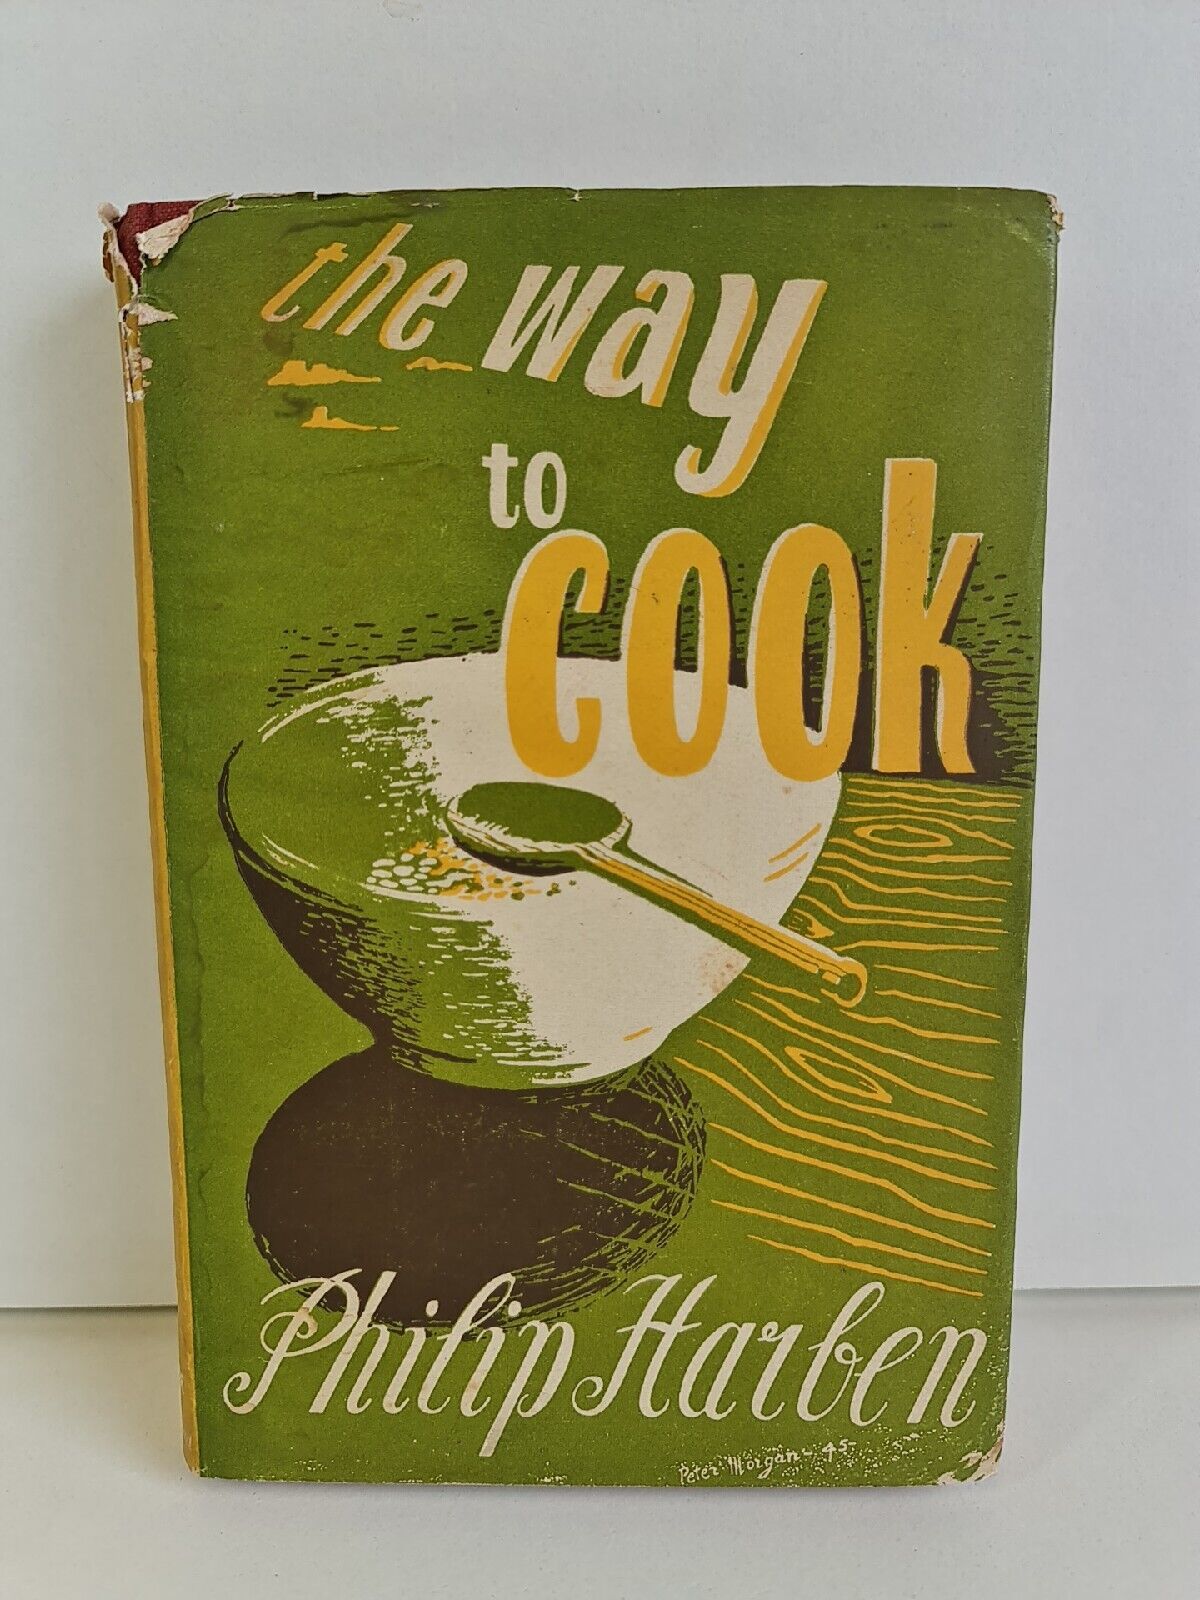 The Way to Cook or Common Sense in the Kitchen by Philip Harben (1945)